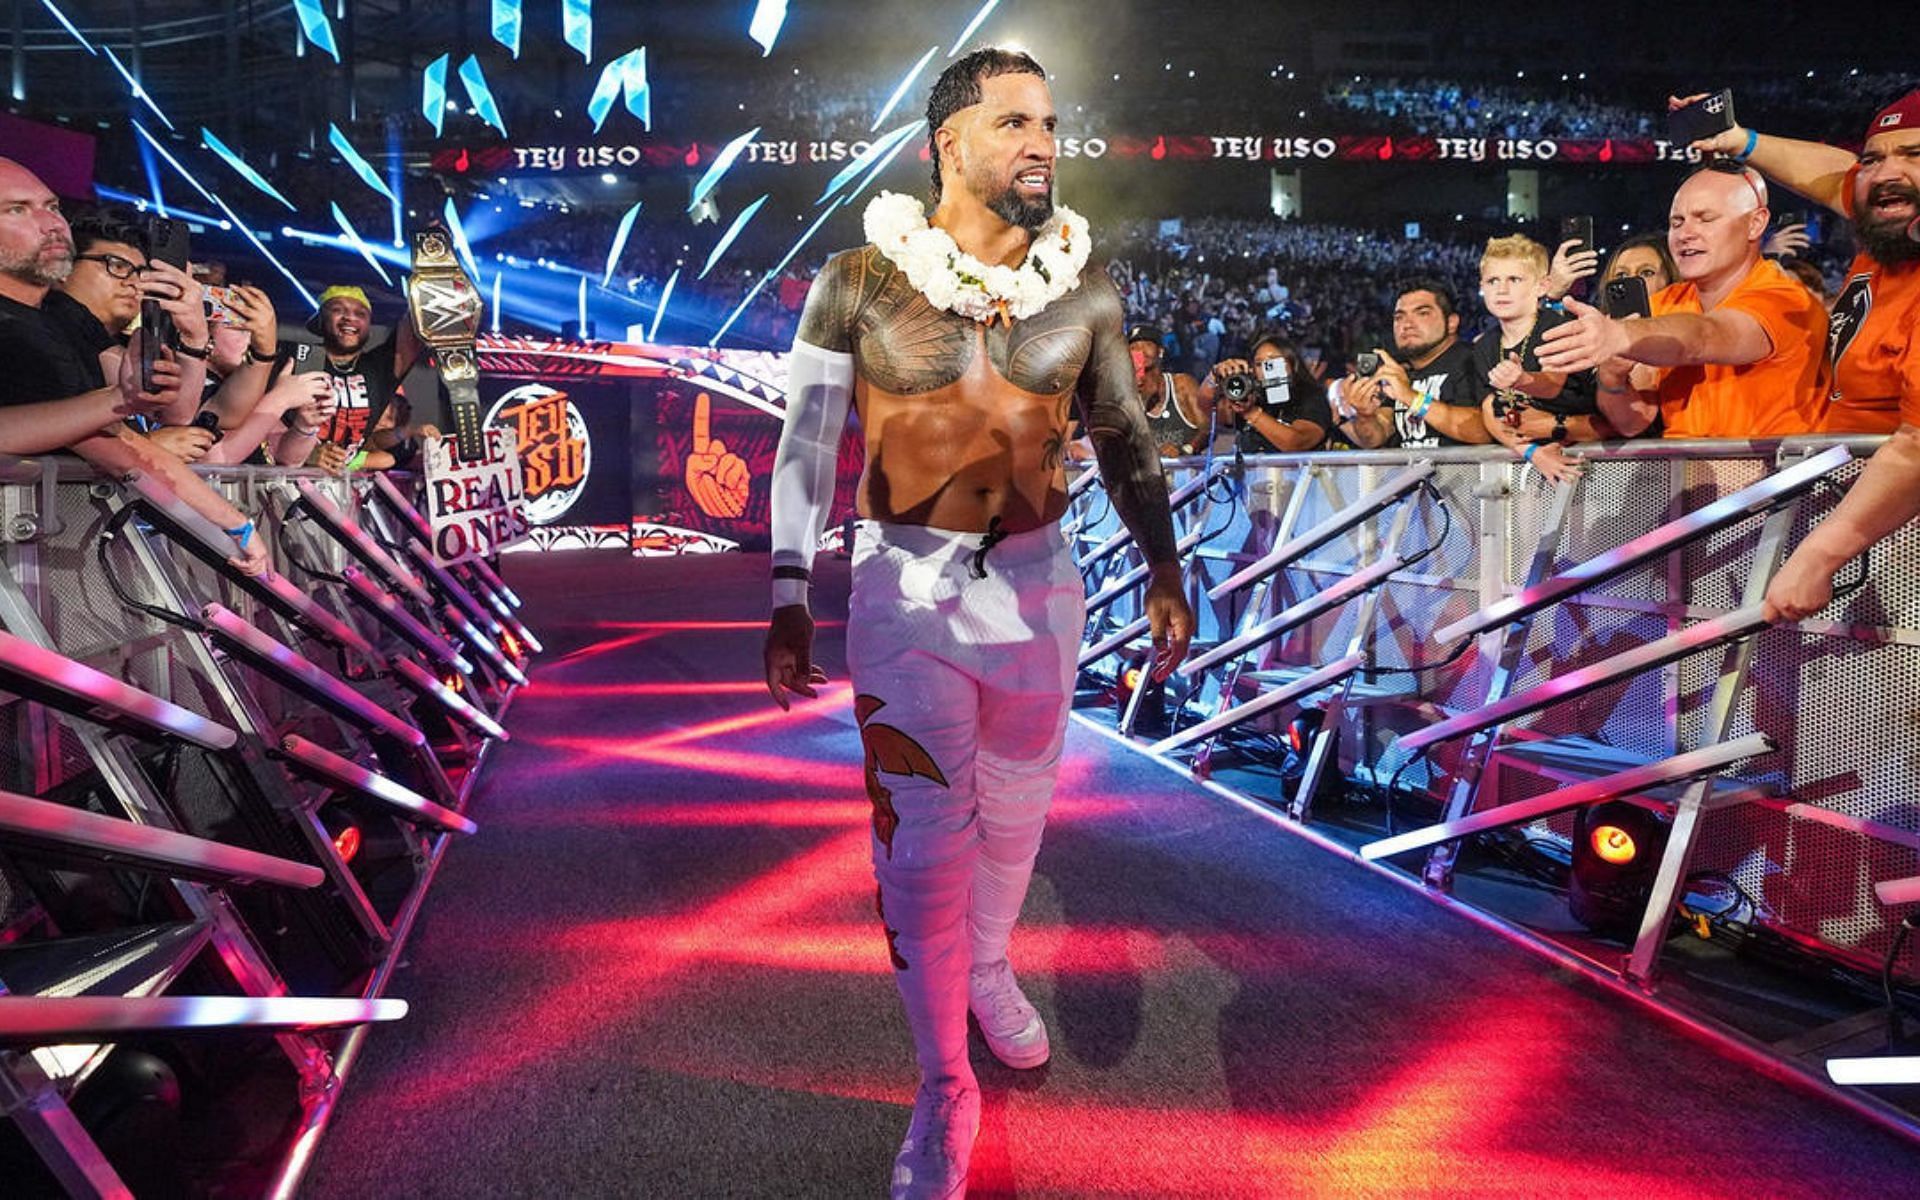 Main Event Jey Uso could face The Rock en route to WrestleMania.